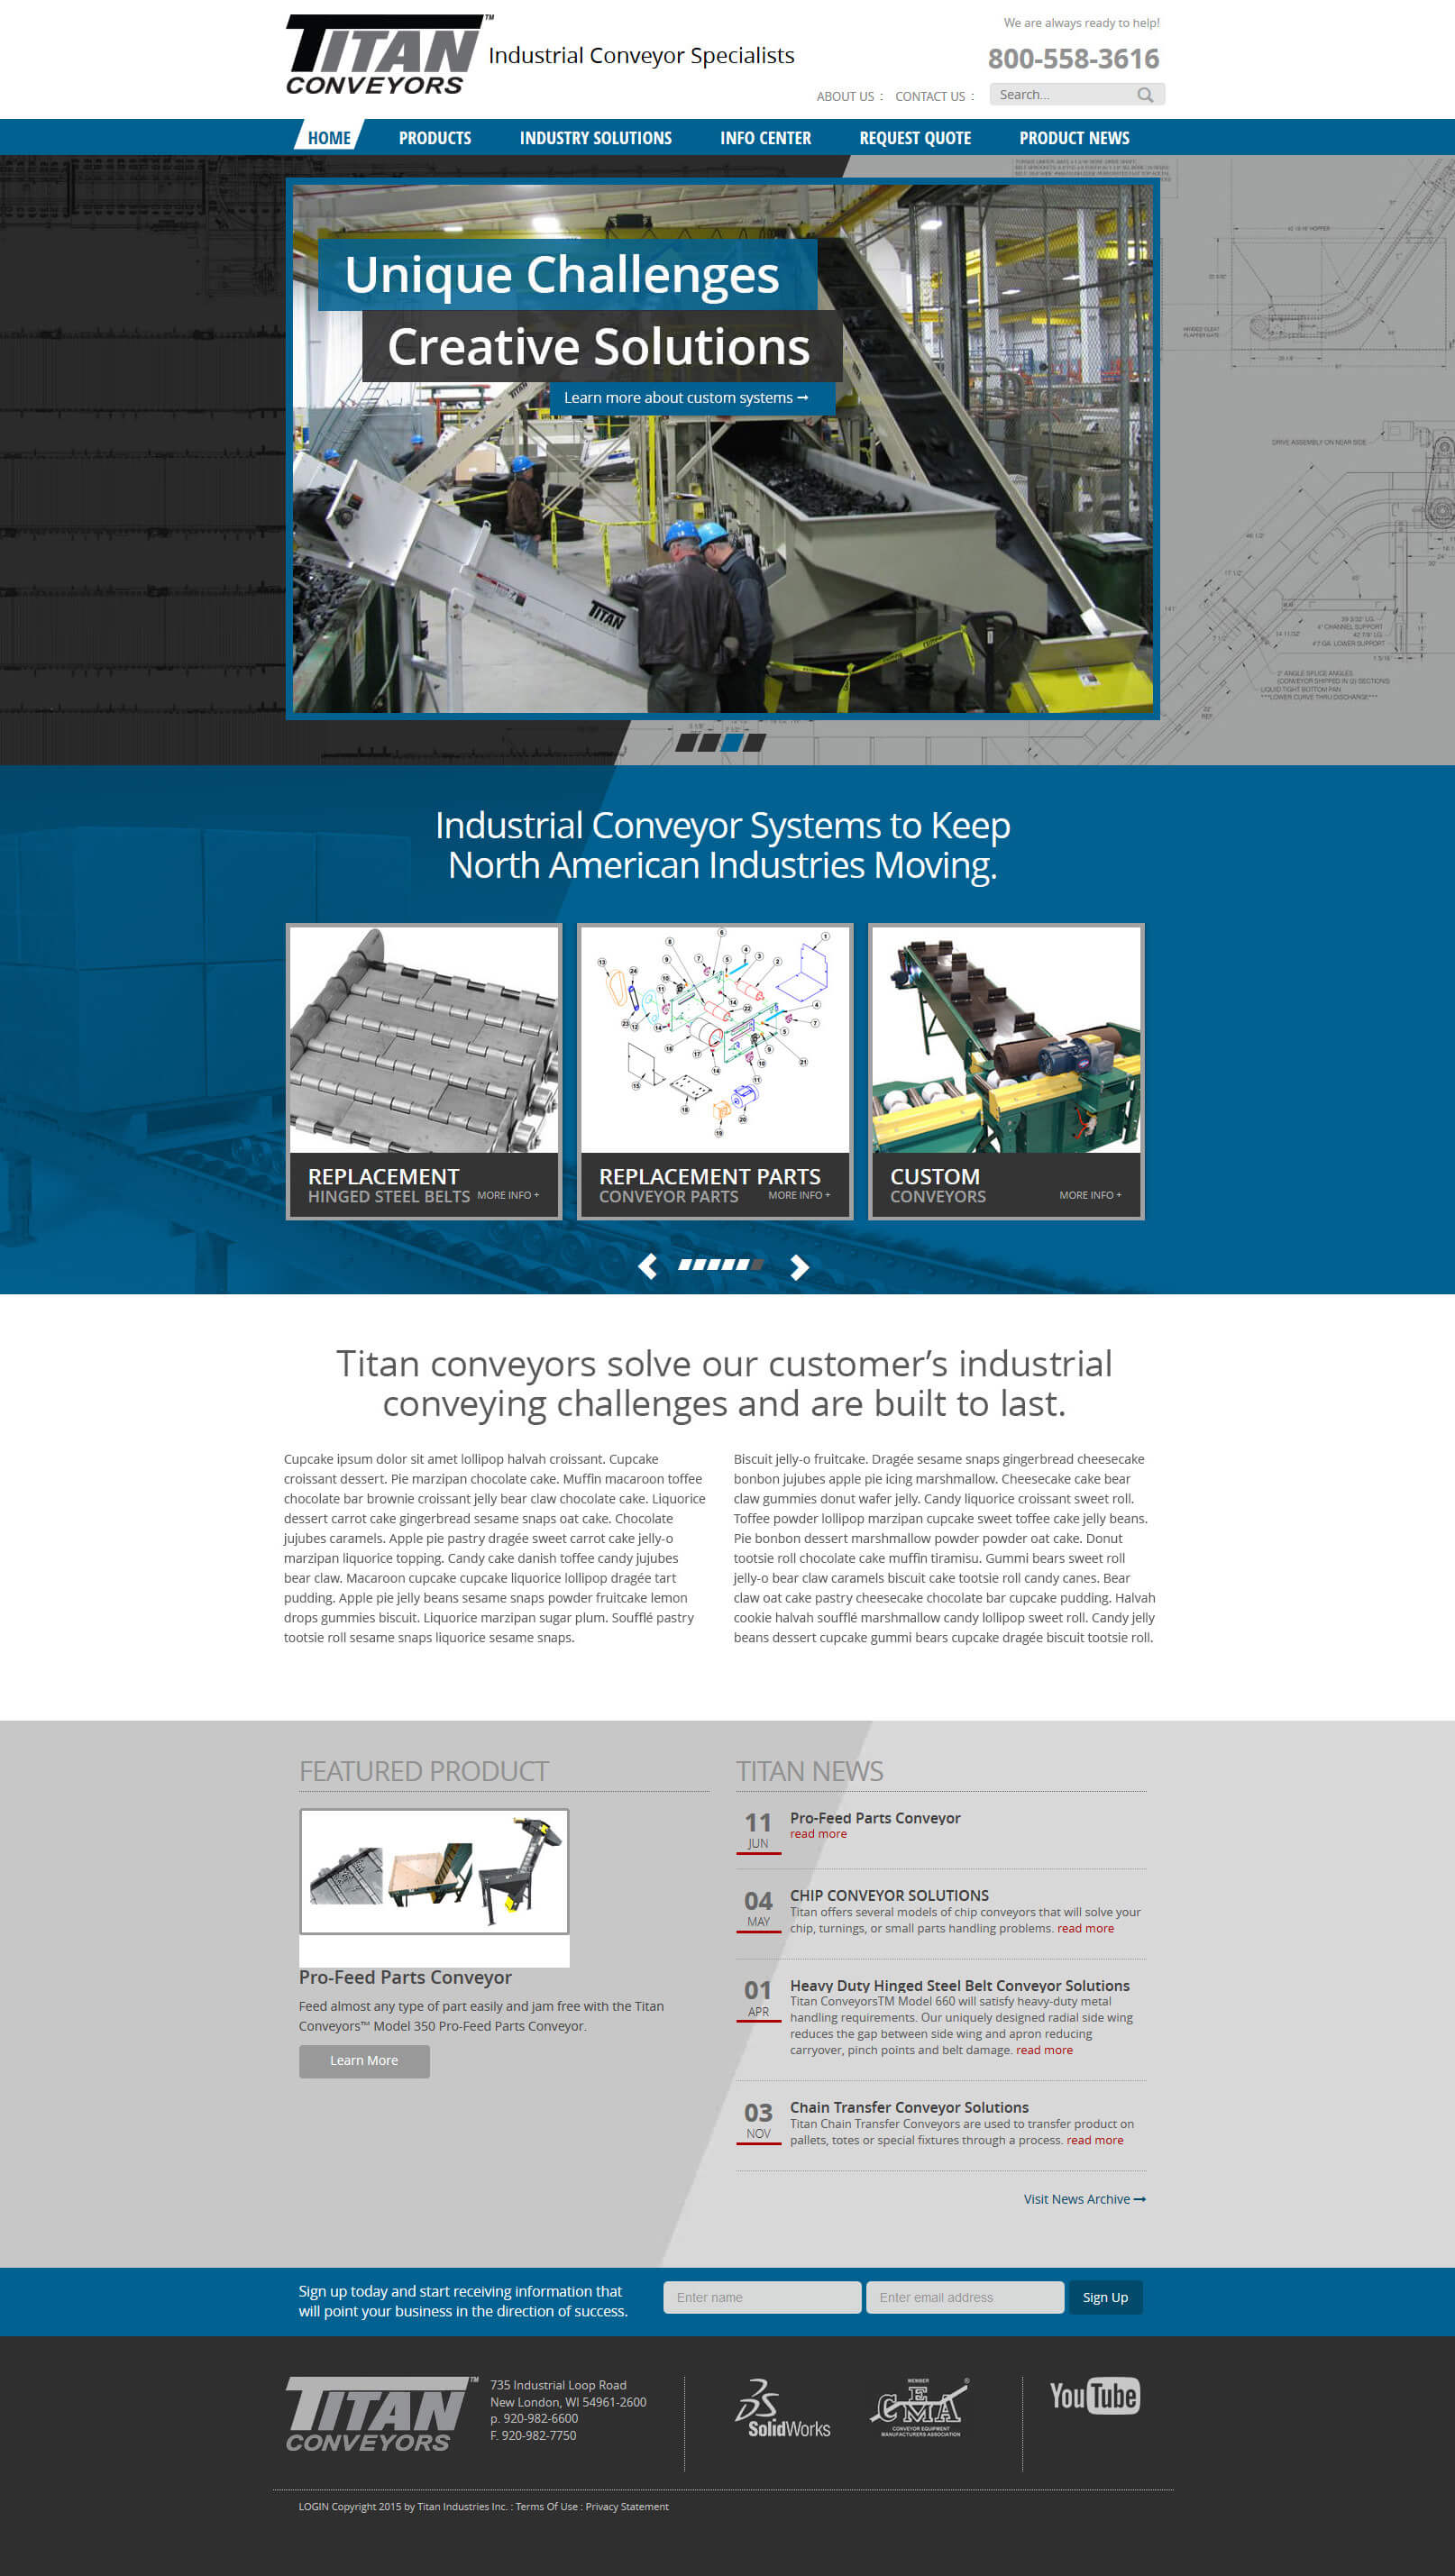 Example of the new and improved DNN website designed by Foremost Media for Titan Conveyors